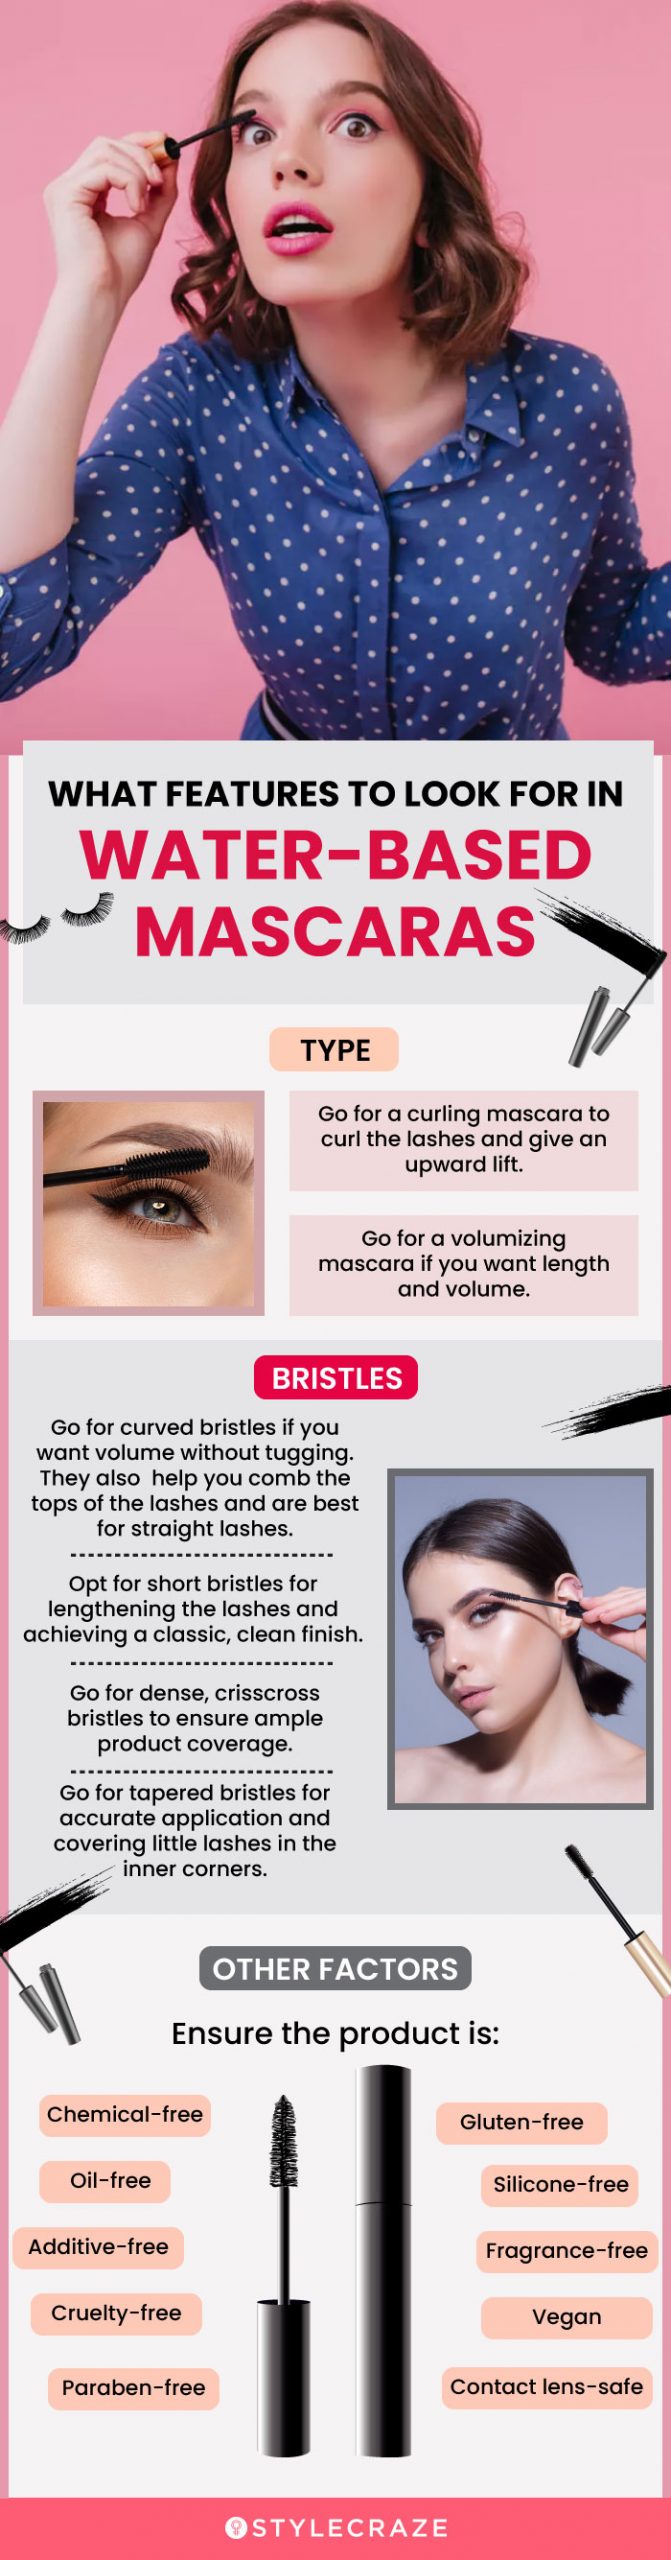 What Features To Look For Water Based Mascaras (infographic)